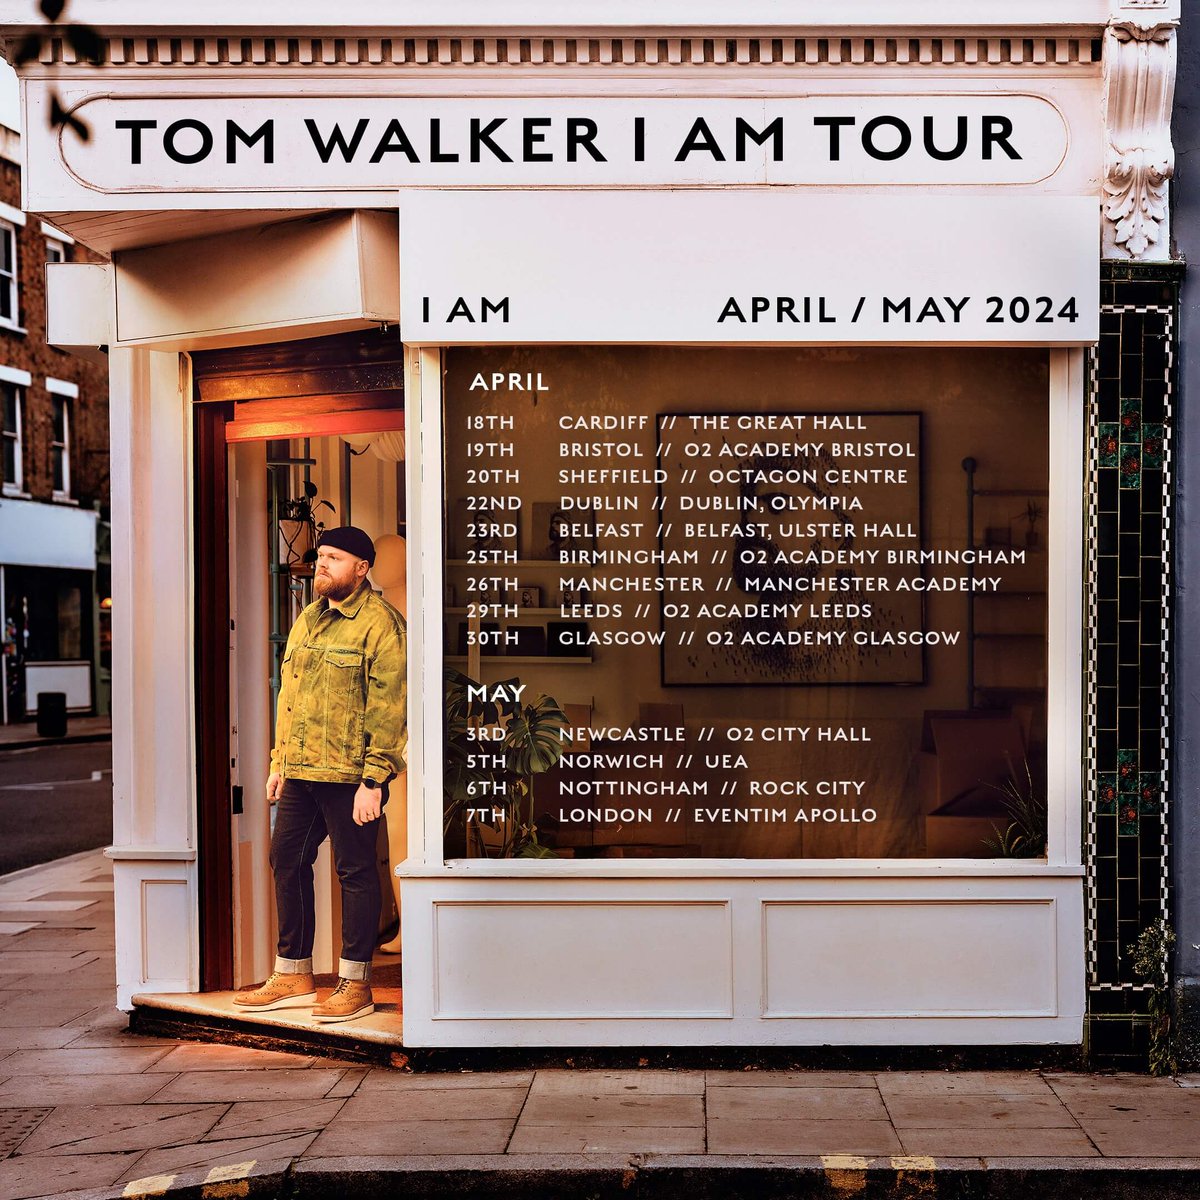 Leeds! Our #GigOfTheDay is Tom Walker @IamTomWalker at @O2AcademyLeeds - don't miss, there are limited spaces left >>  allgigs.co.uk/view/artist/81…